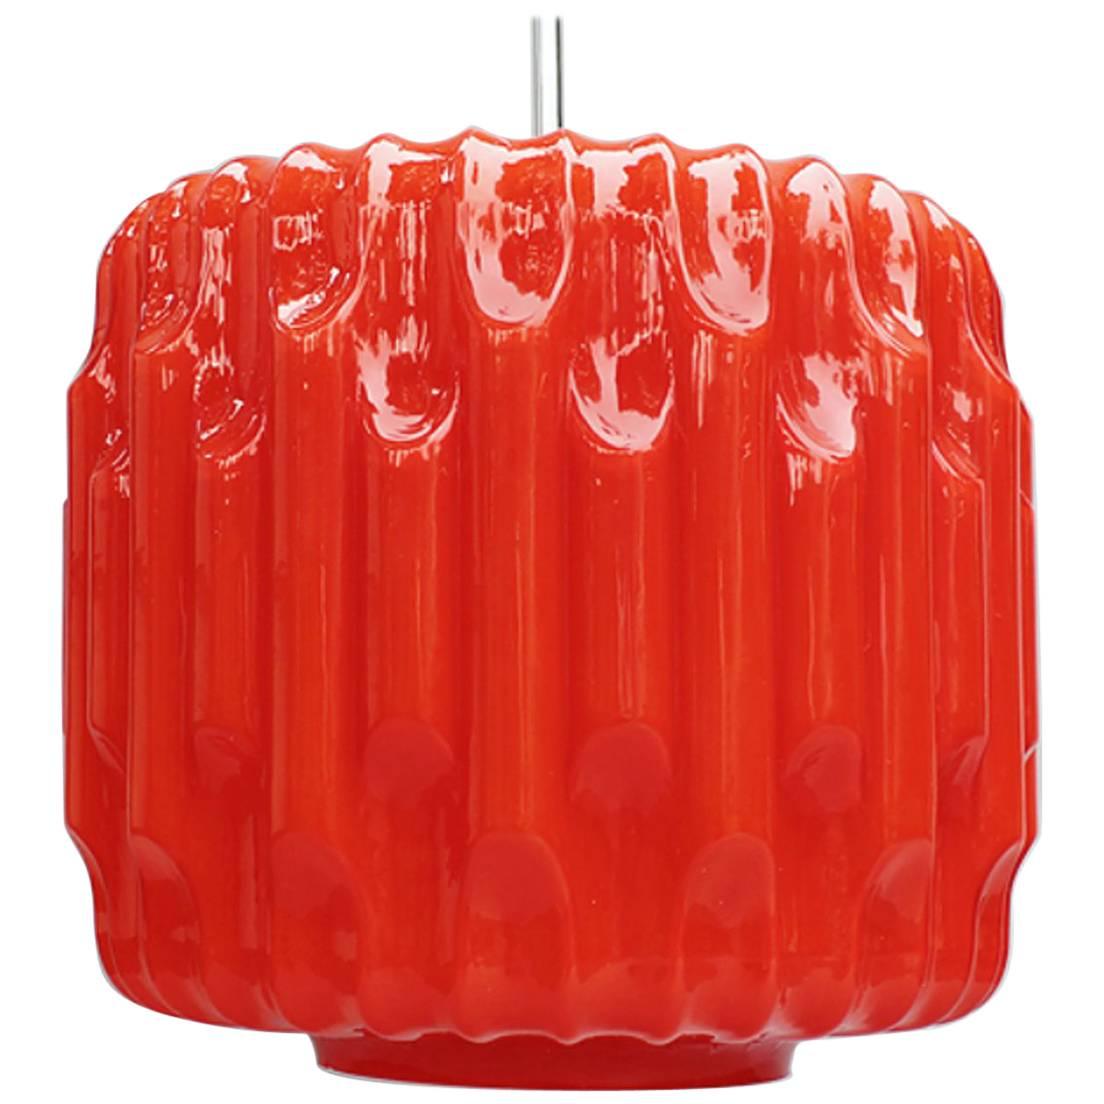 Large Red Mid-Century Glass Pendant